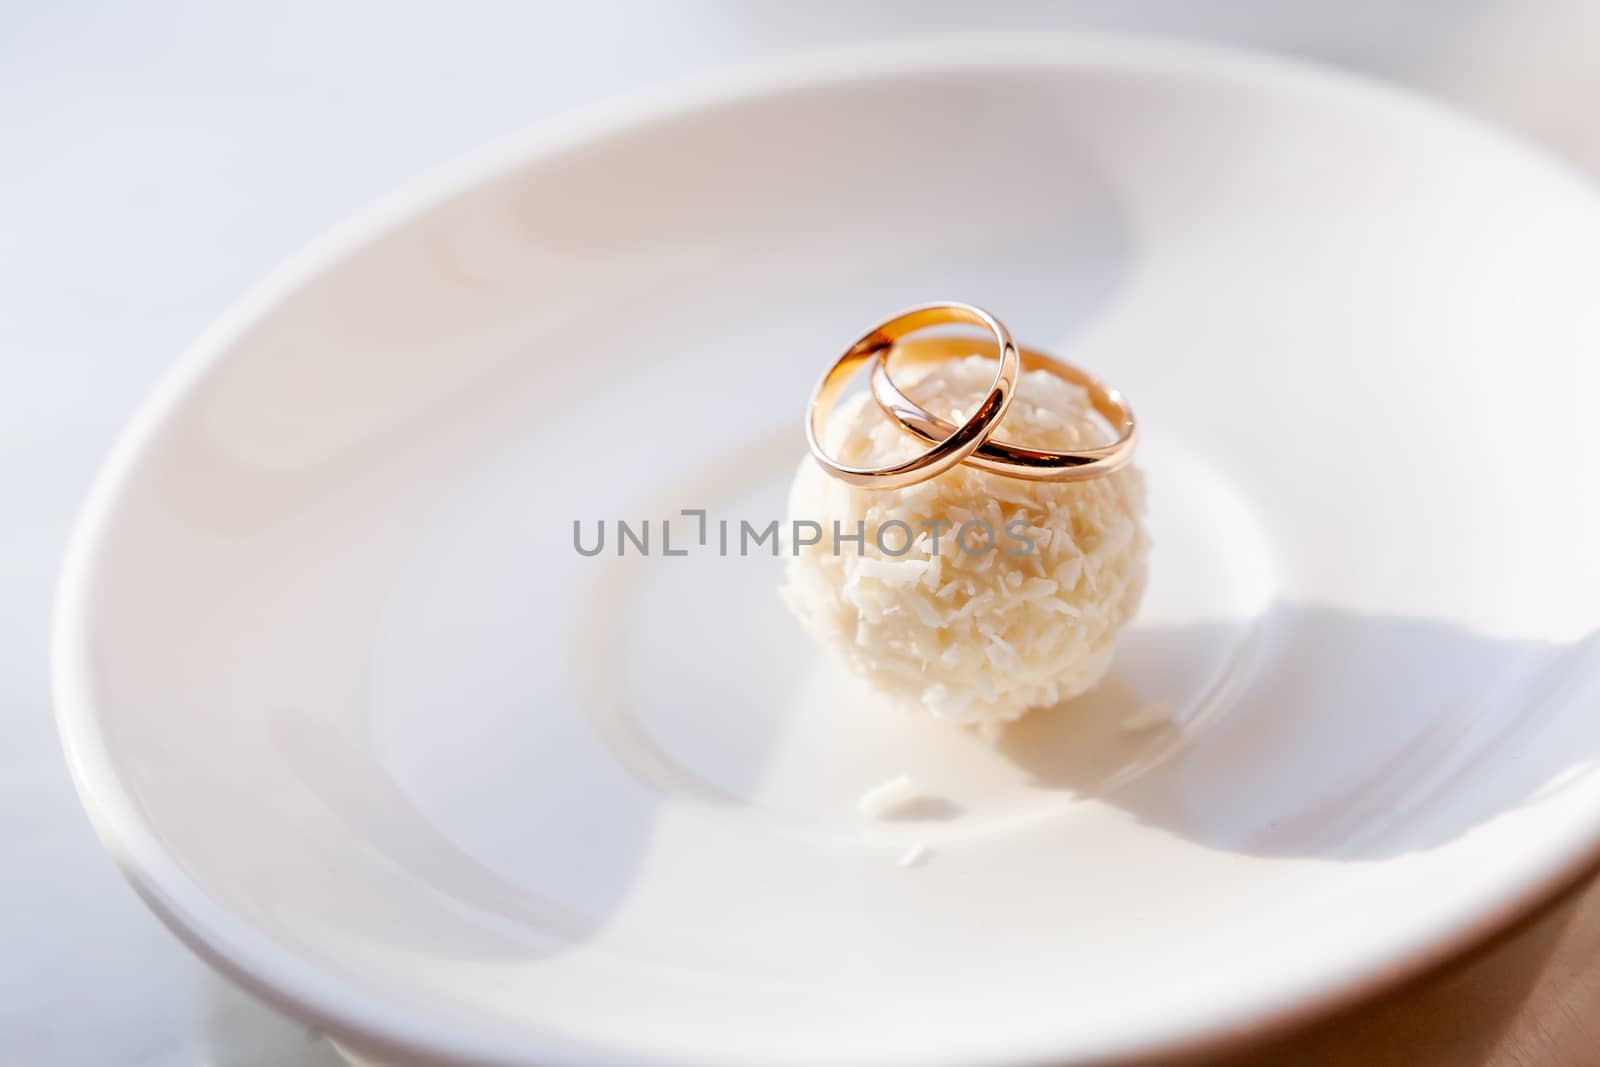 Golden wedding rings on pastry with coconut topping. Traditional symbol of love and marriage on tasty circle tart.